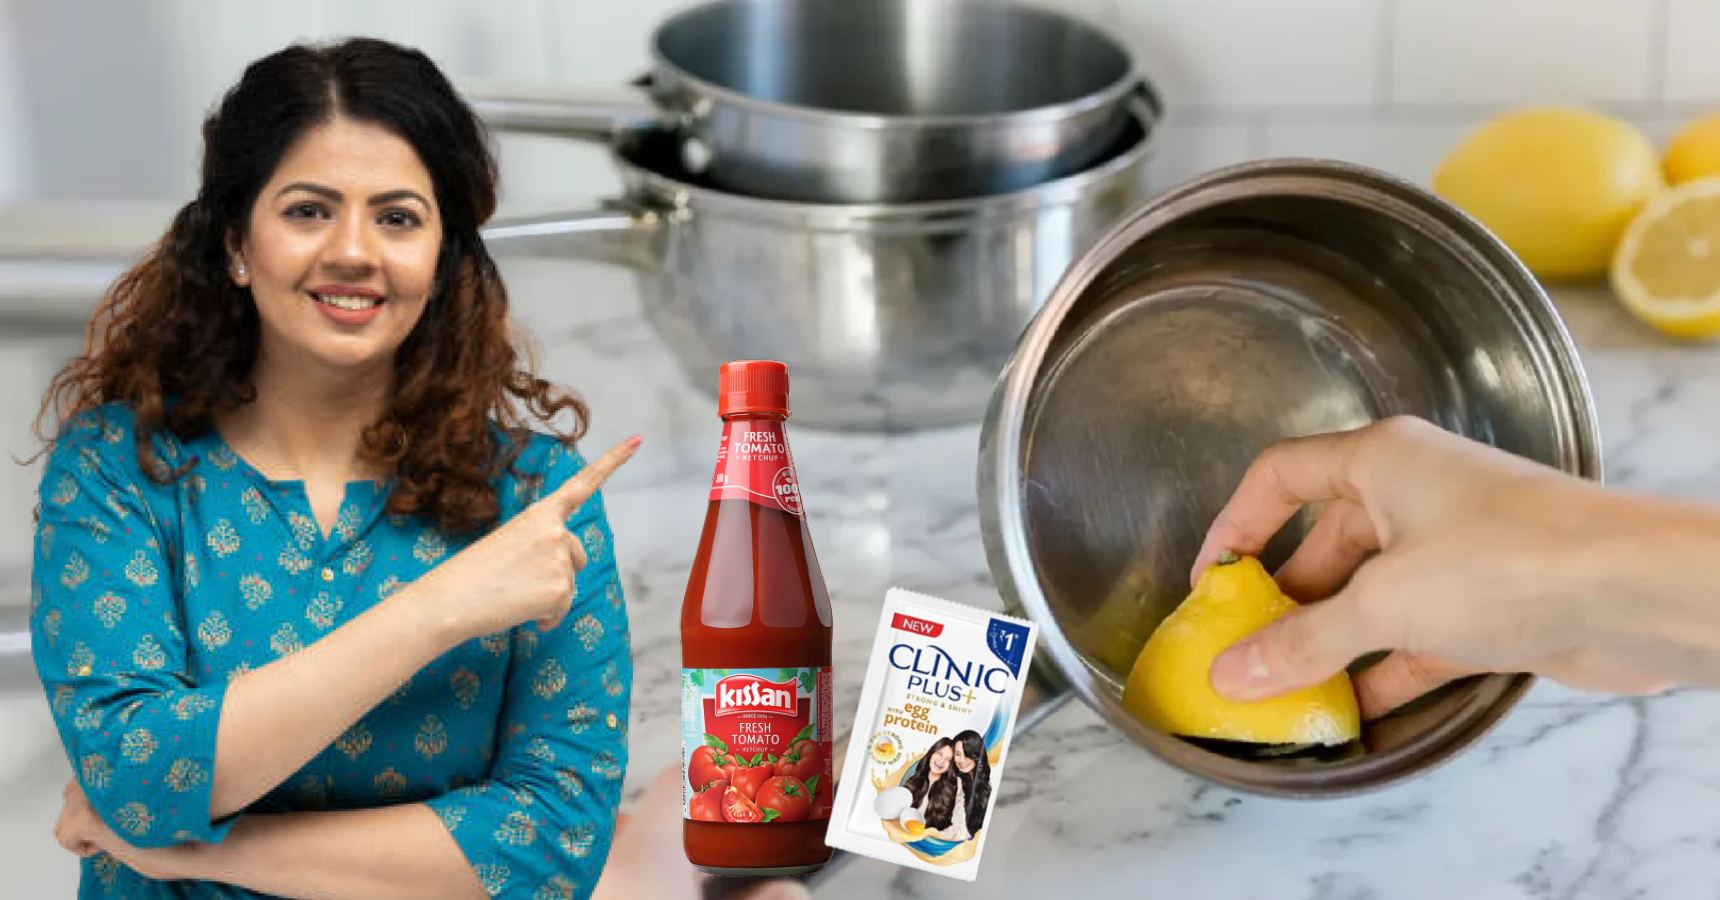 Best Way To Clean Burnt Cooking Utensils Home Remedy